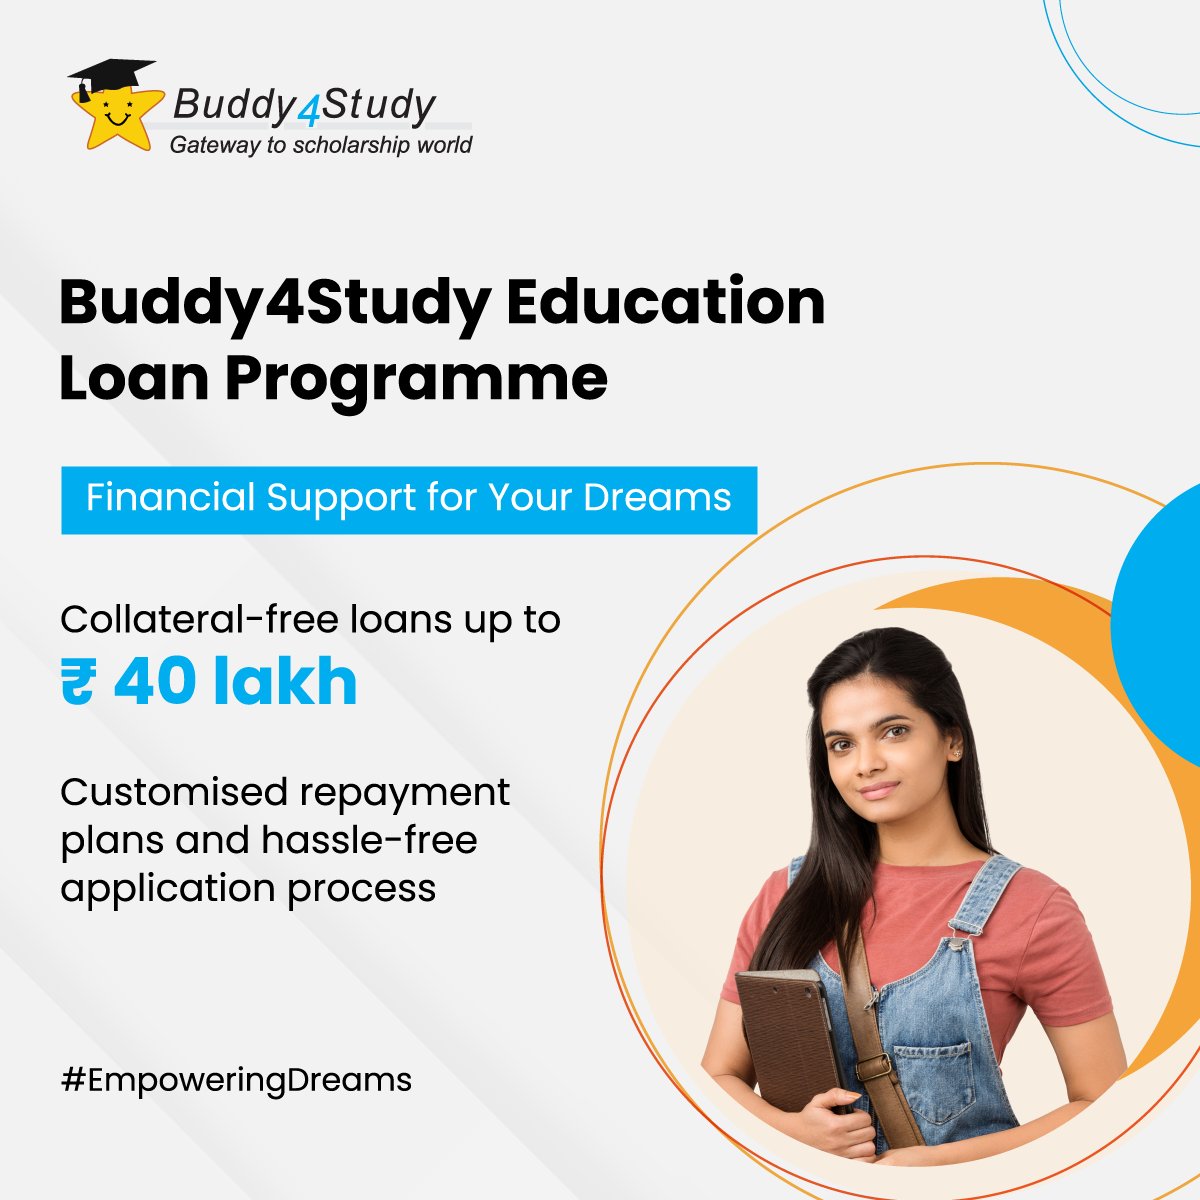 Buddy4Study Education Loan Programme is here to provide collateral-free loans up to ₹ 40 lakh for your higher studies. Apply now. b4s.in/a/tt_LOAN1_202… #EducationLoan #Buddy4Study #EmpoweringDreams